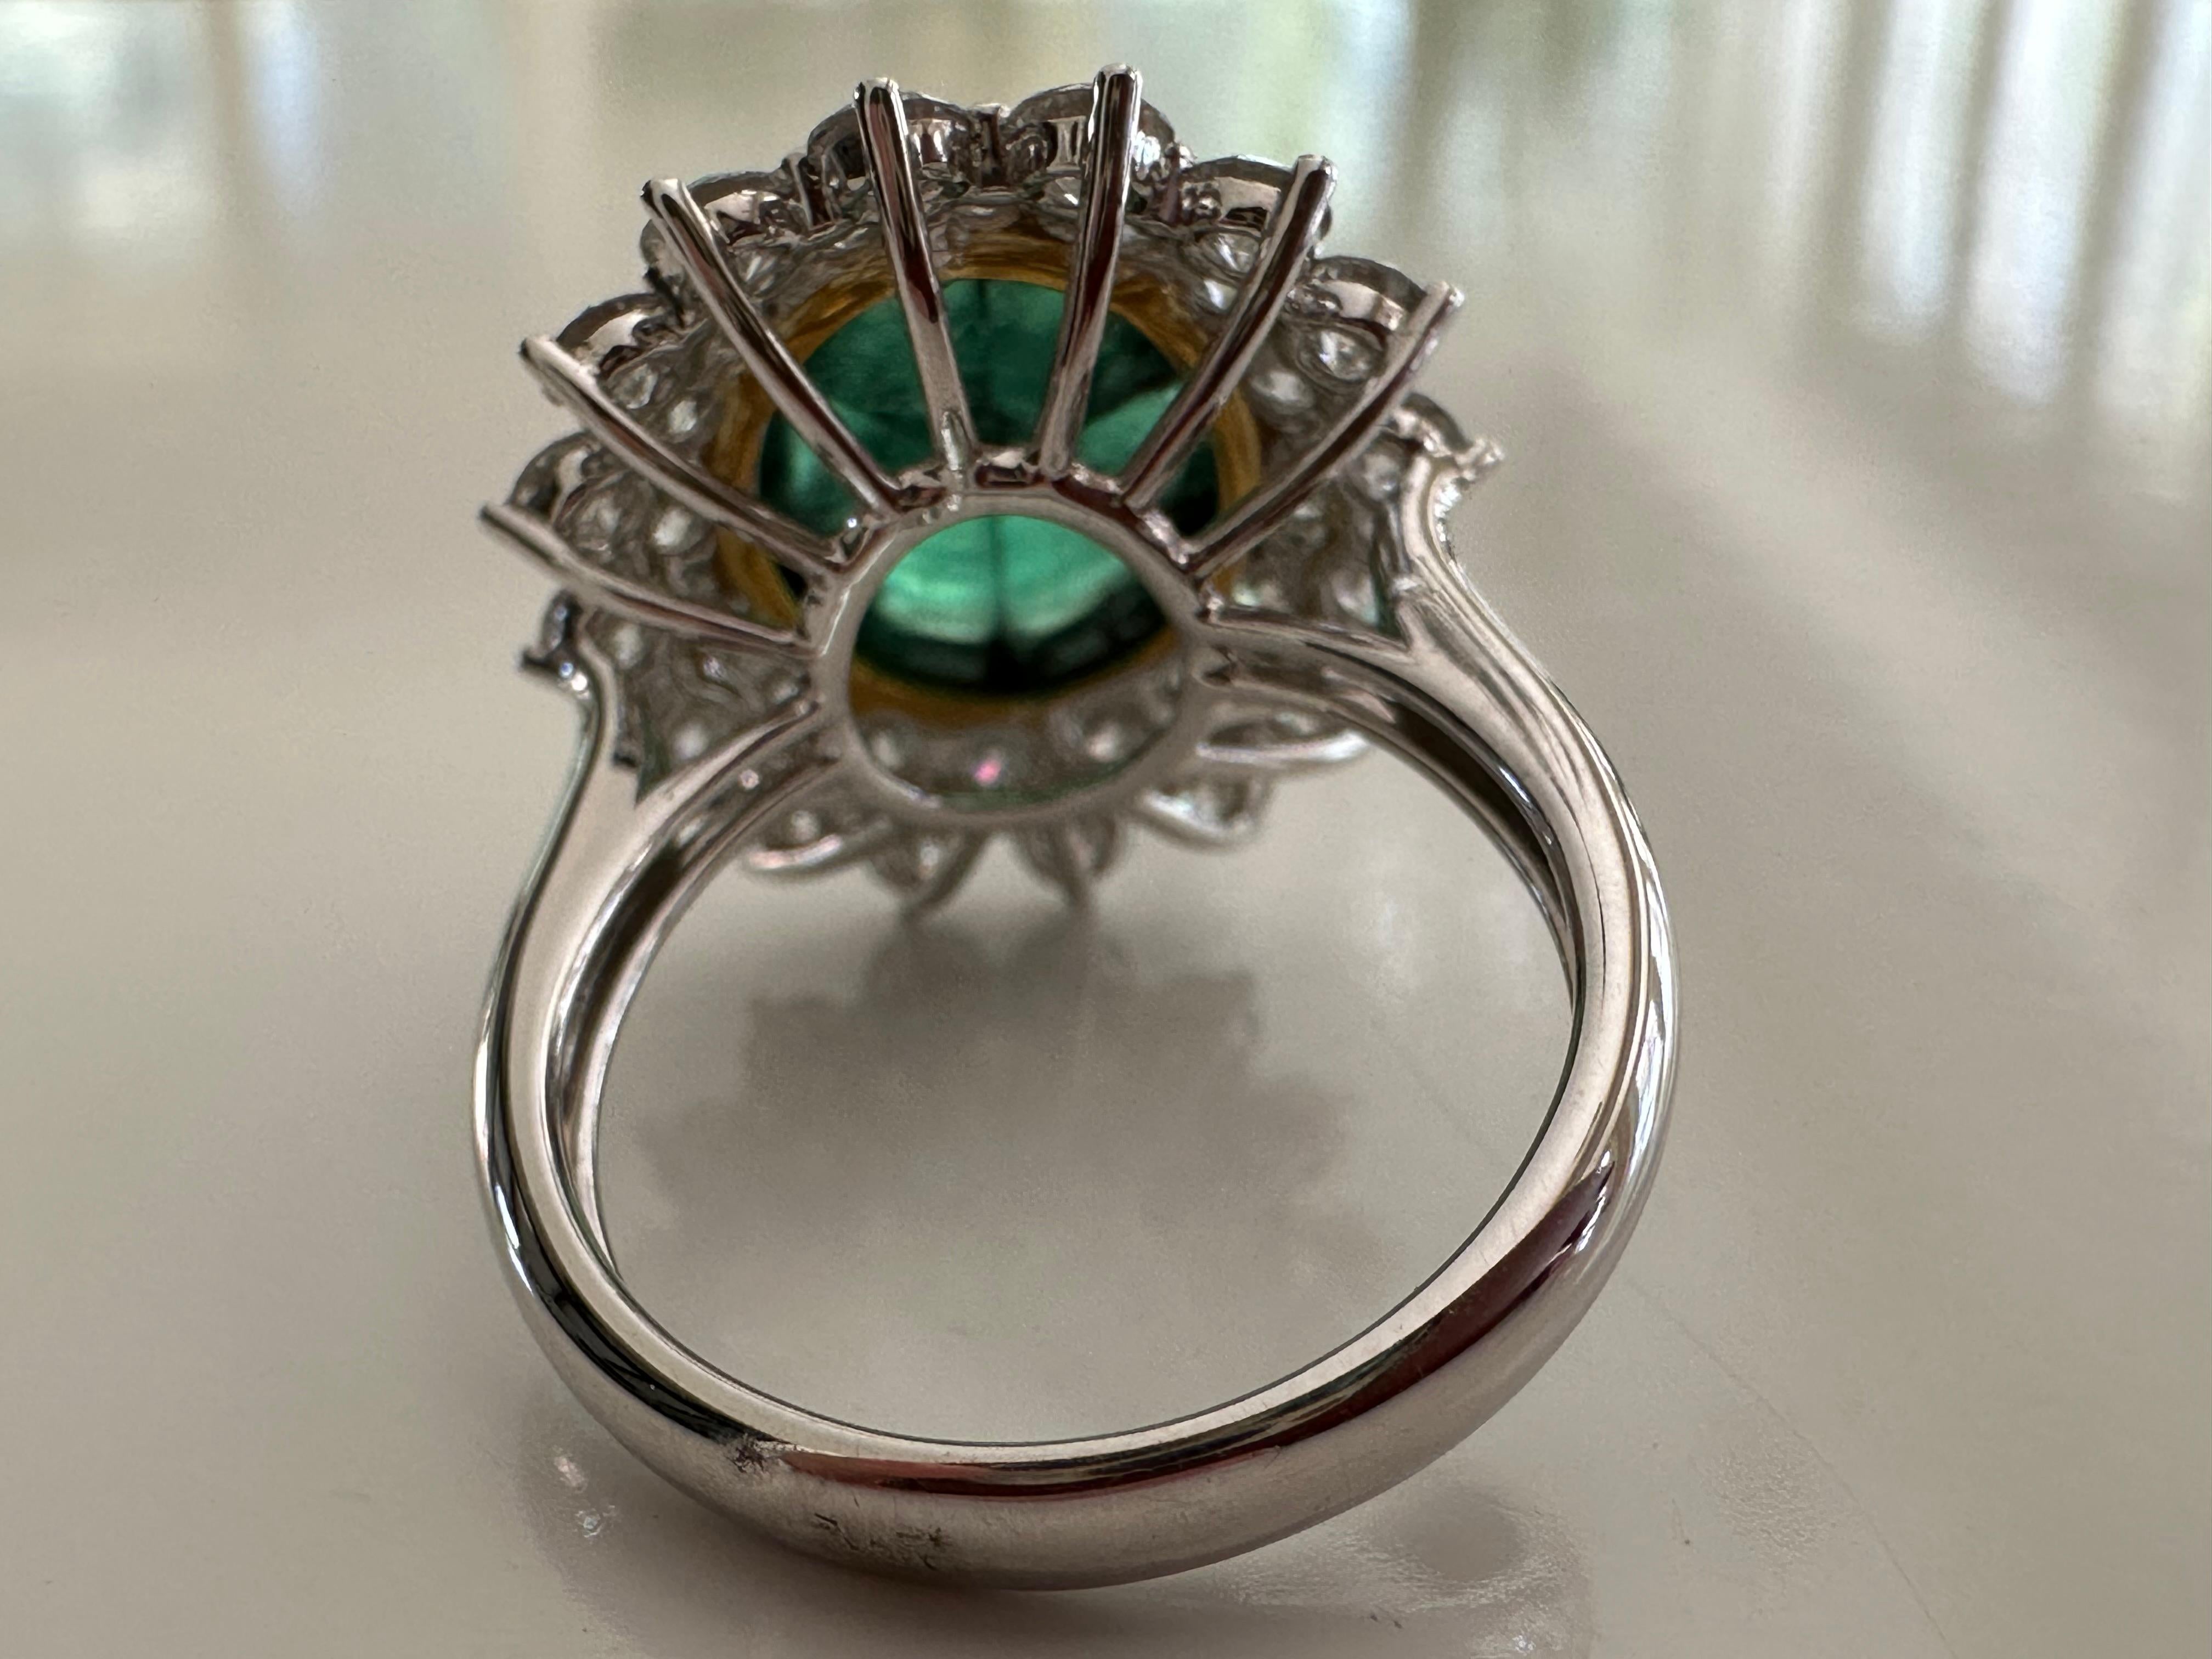 This exquisite ring features a rare 5.21-carat natural Colombian trapiche emerald oval-shaped cabochon   framed by 2.57 carats of round brilliant-cut diamonds.  The stone's trademark wheel spoke pattern is the result of black carbon impurities that